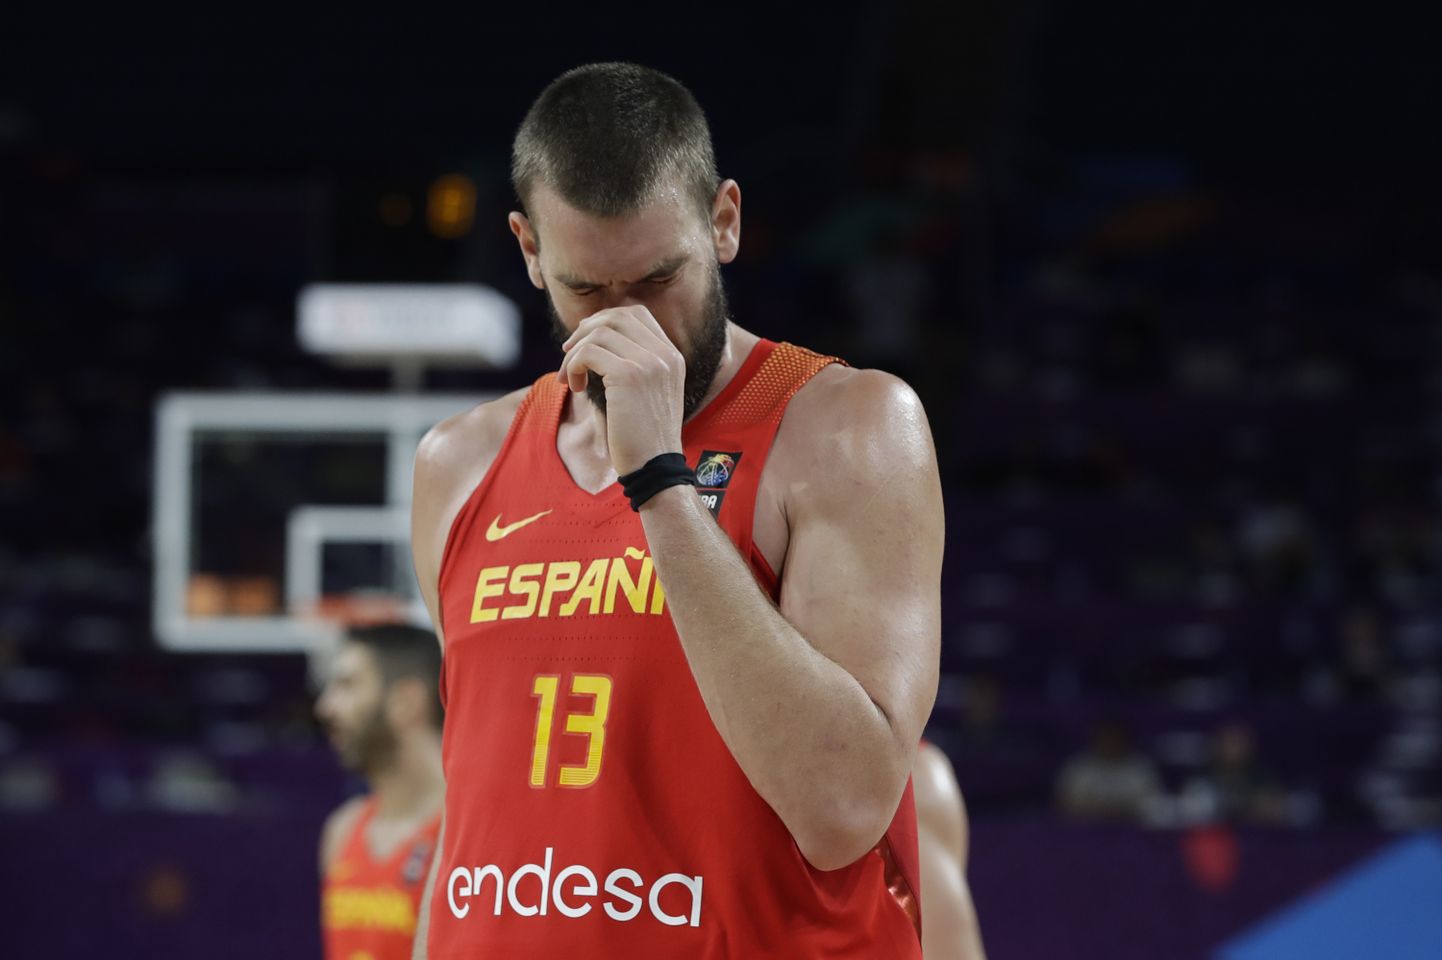 Spain's Marc Gasol reacts during their Eurobasket European Basketball Championship quarterfinal match against Germany, in Istanbul, Tuesday, Sept. 12. 2017. (AP Photo/Thanassis Stavrakis)